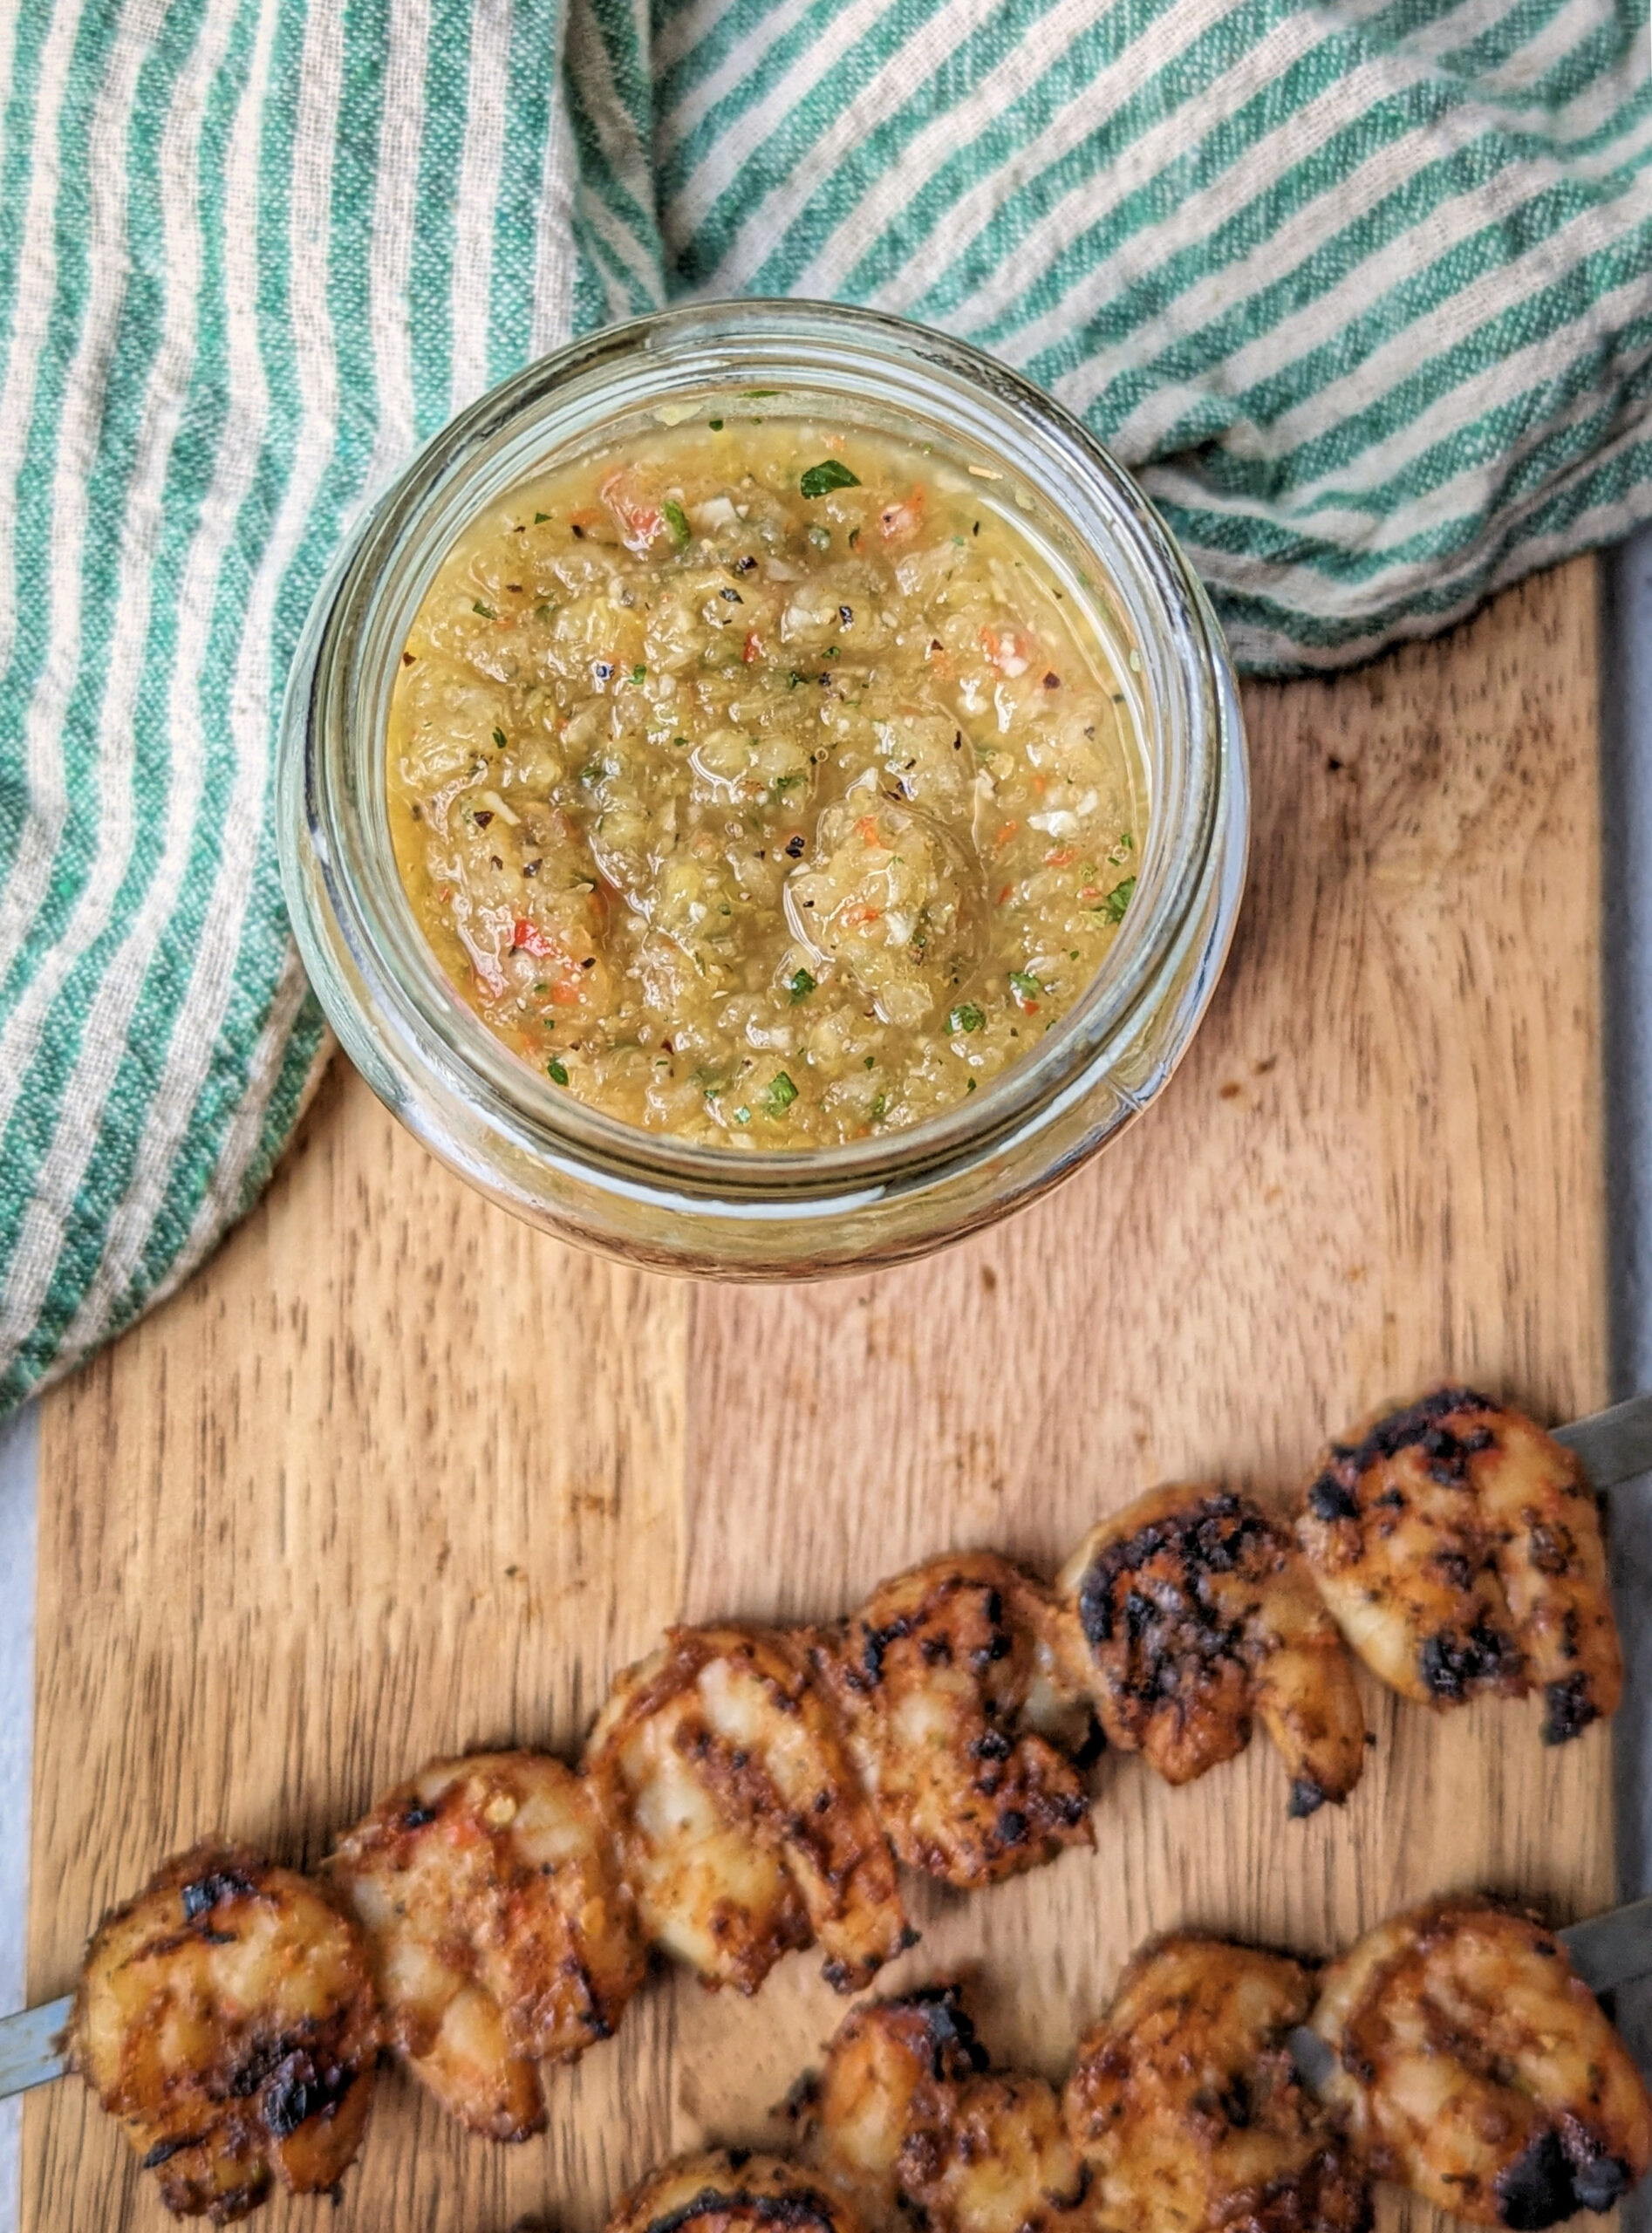 Caribbean Hot Sauce in a glass jar with shrimp skewers in the background.